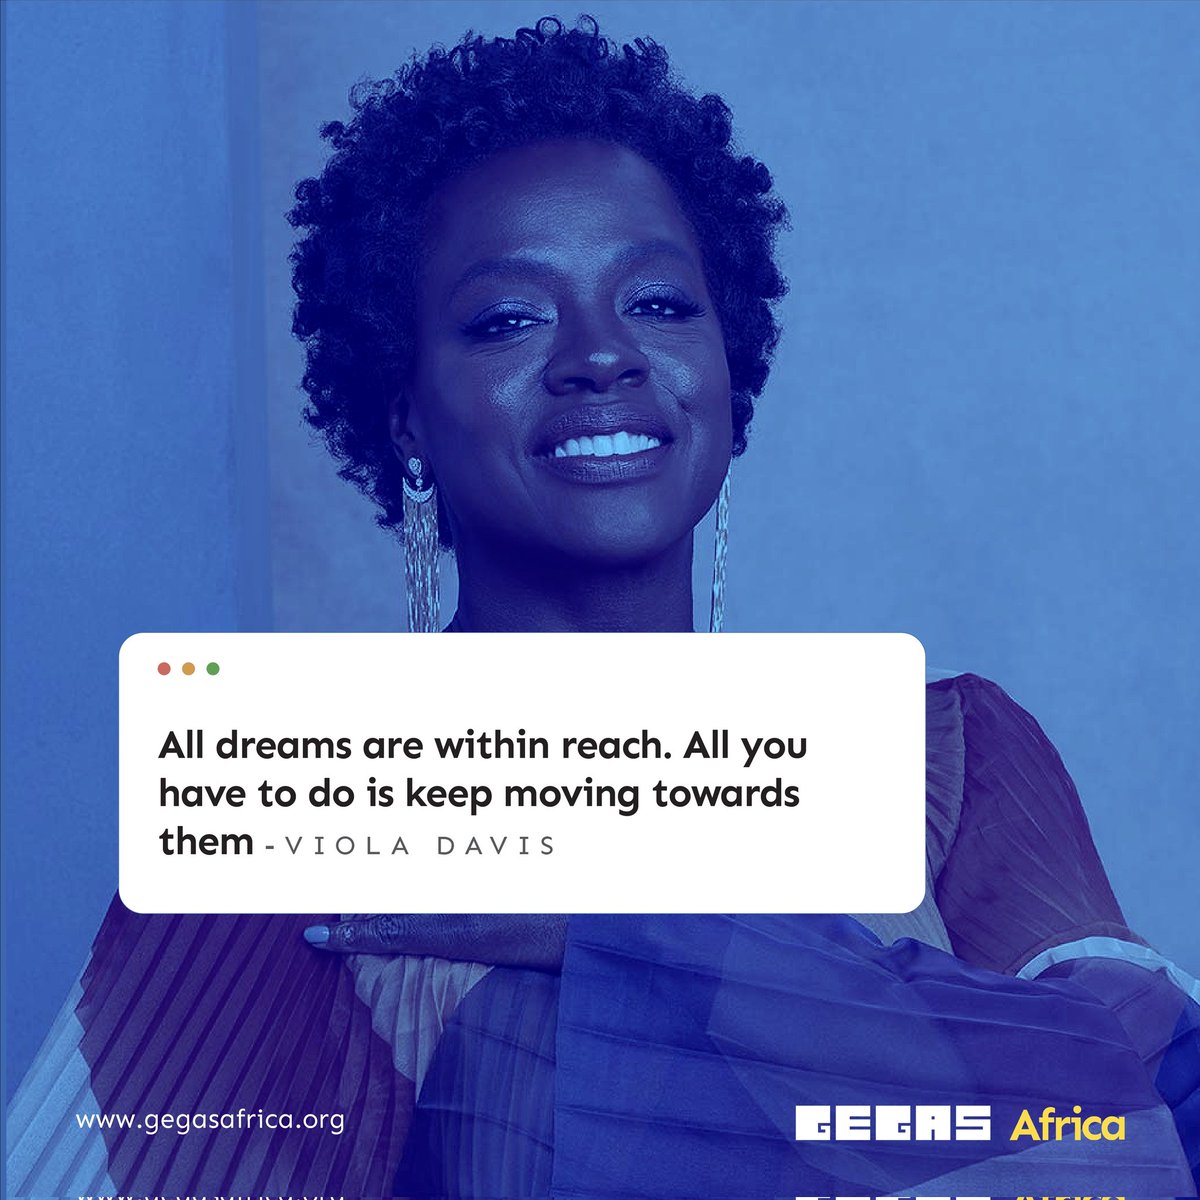 Welcome to the start of a new week!

Every step you take, every decision you make, brings you closer to your goals. This week, don't let fear or doubt hold you back - keep pushing forward, even when the journey gets tough. 
#mondaymotivation #goals #goalgetter #gegasafrica